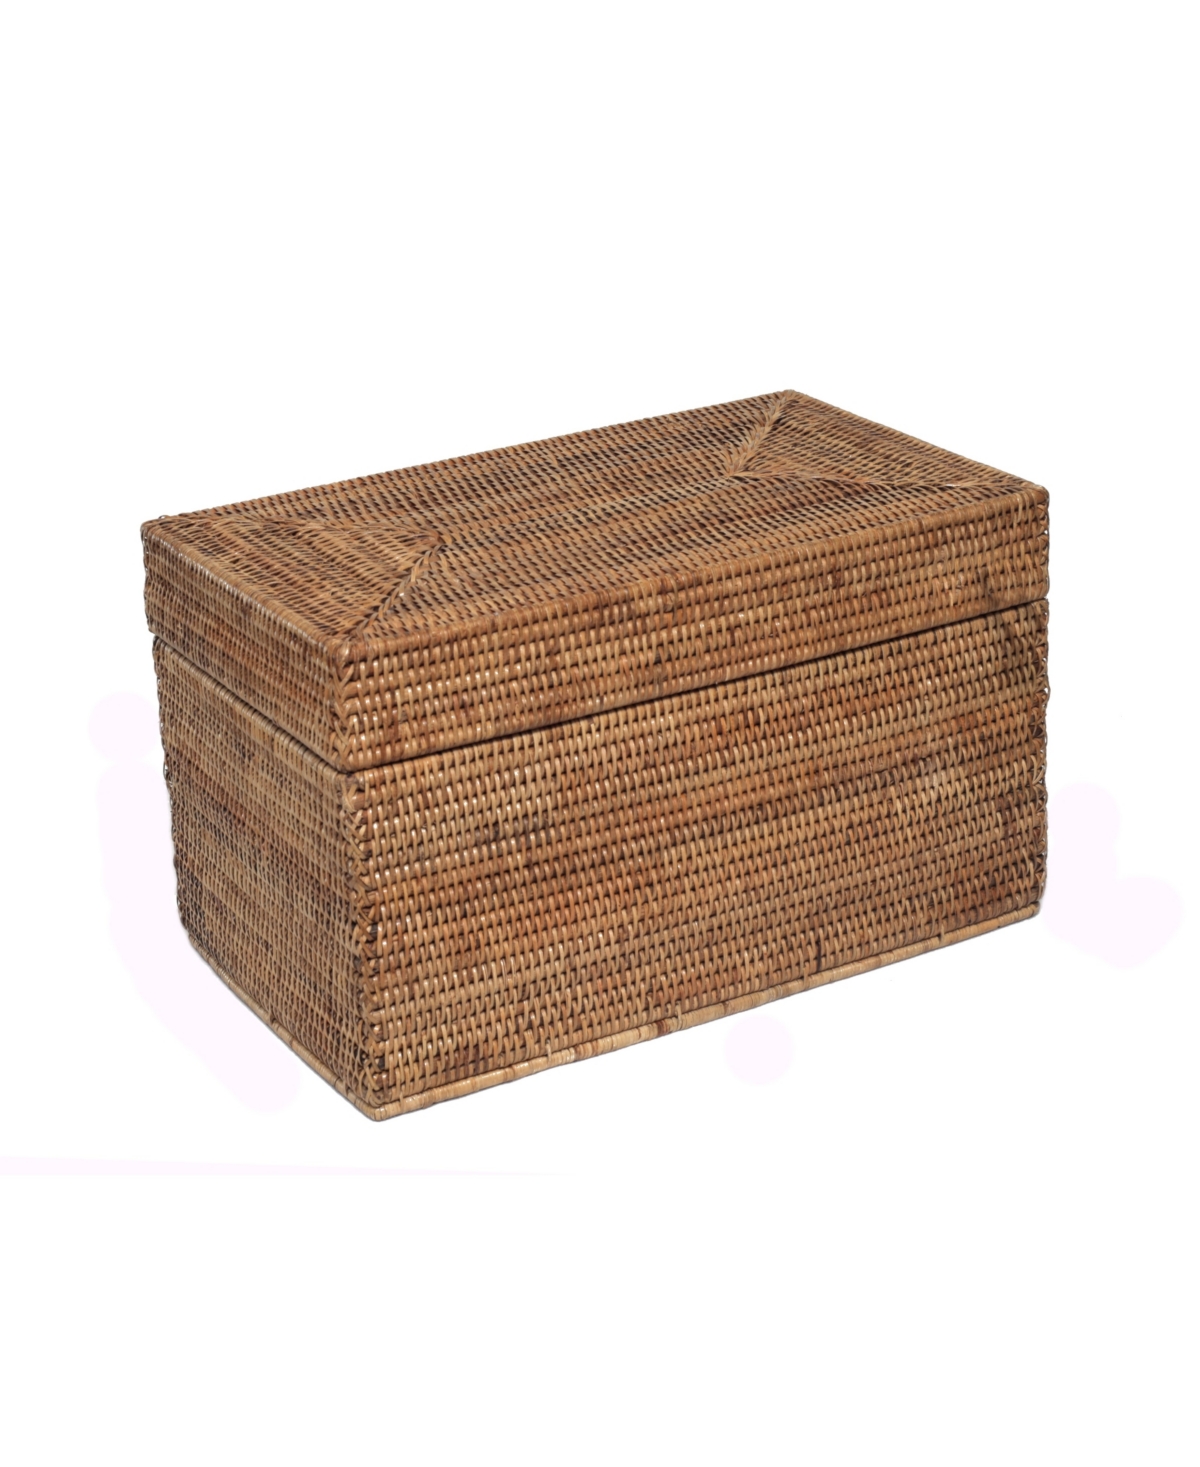 Shop Artifacts Trading Company Artifacts Rattan Rectangular Hinged Chest In Honey Brown